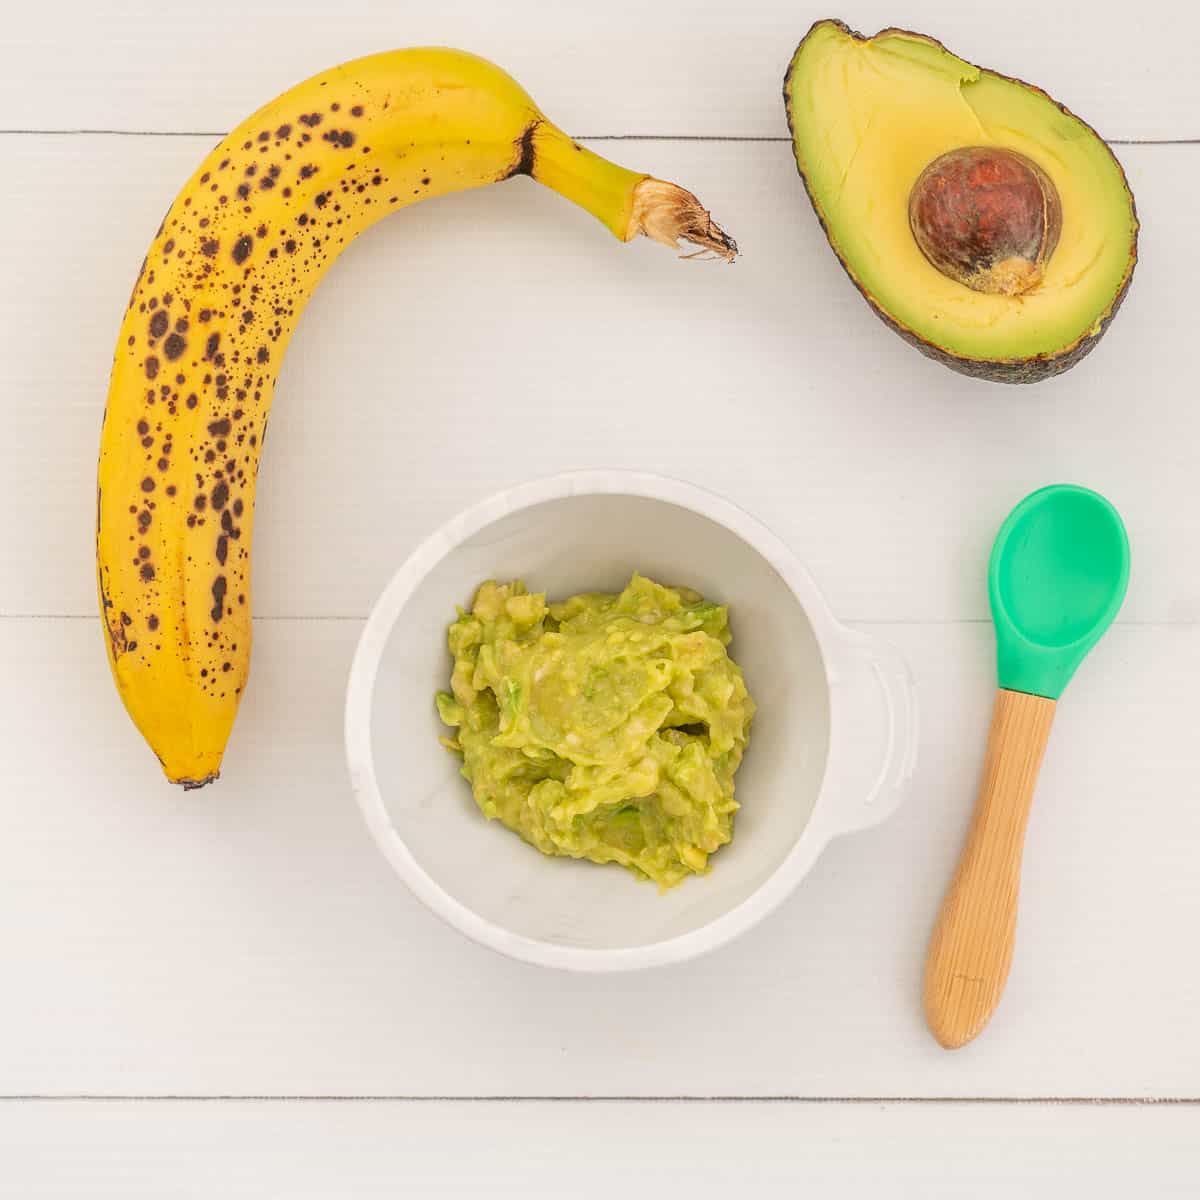 mashed avocado and banana baby food in a white baby bowl with green spoon